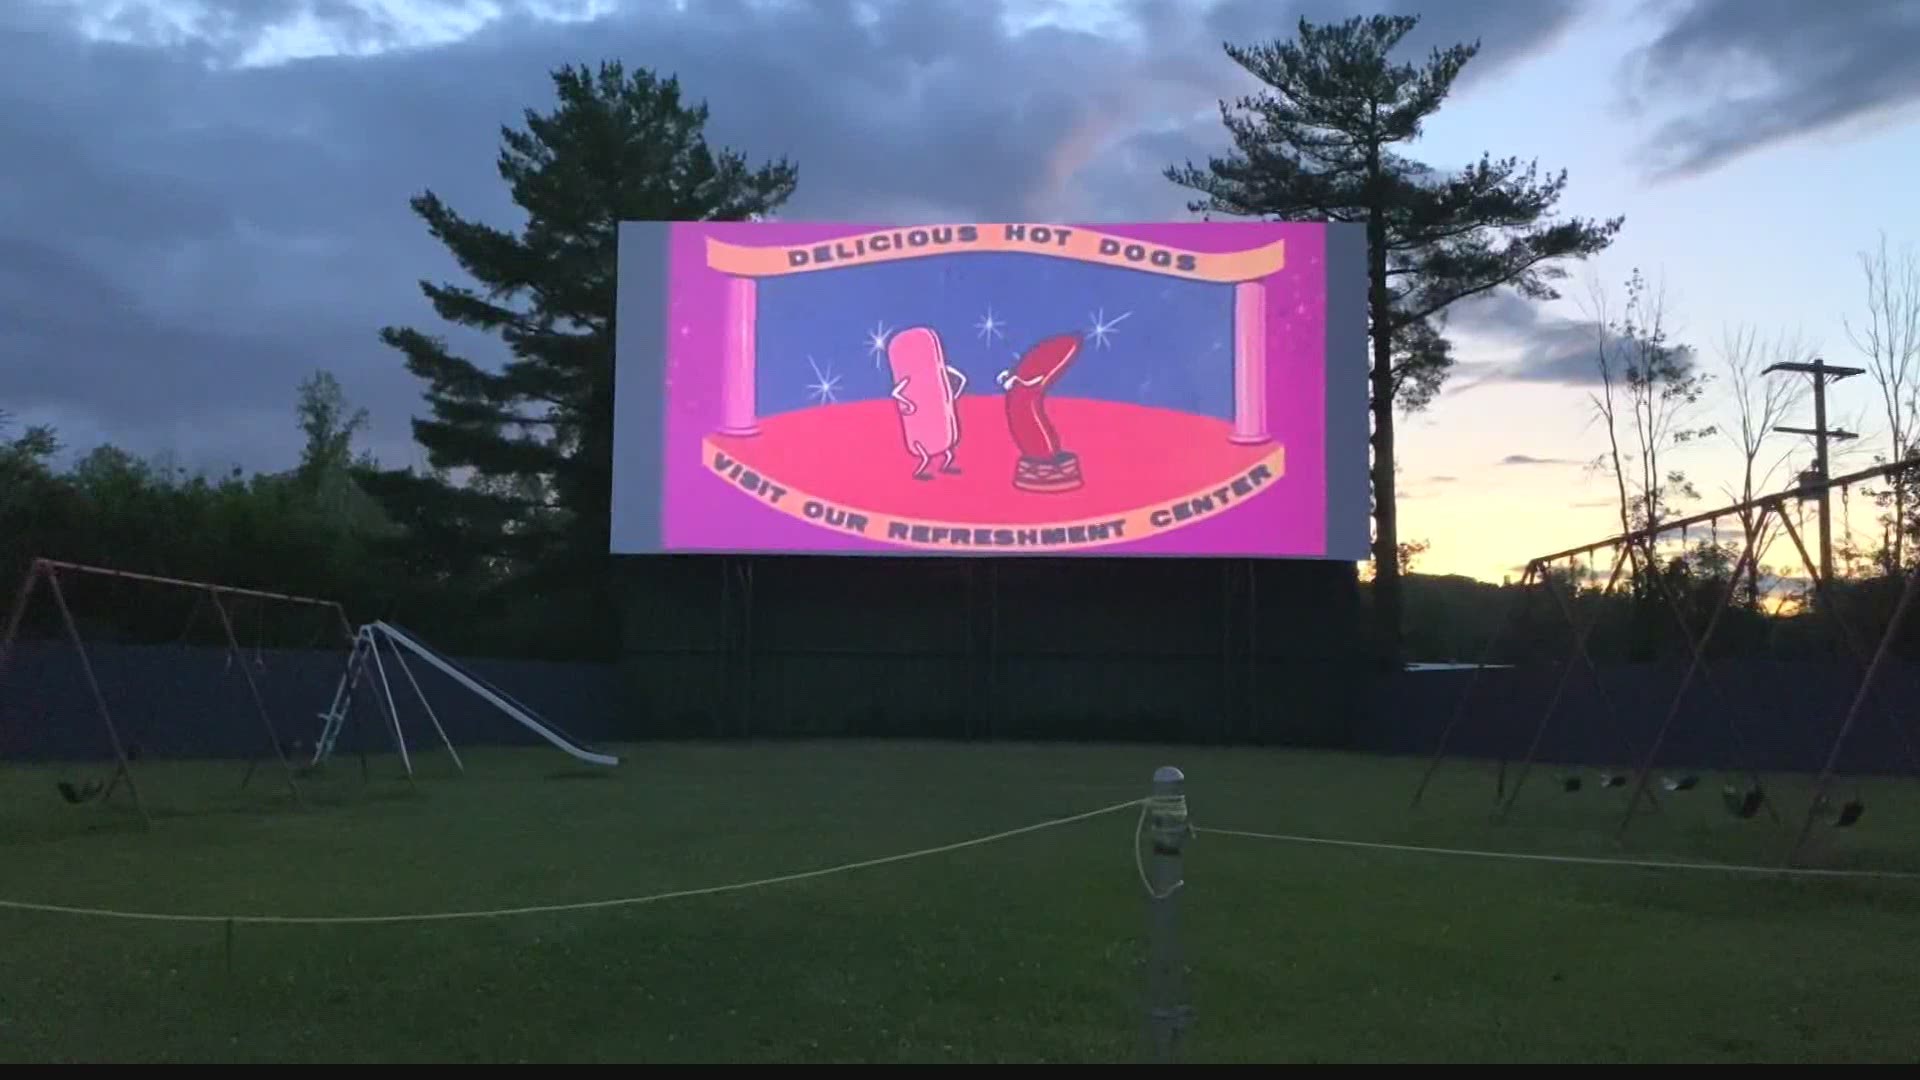 Because of coronavirus restrictions, drive-in movies are making a comeback all over the country... and all over Indiana.